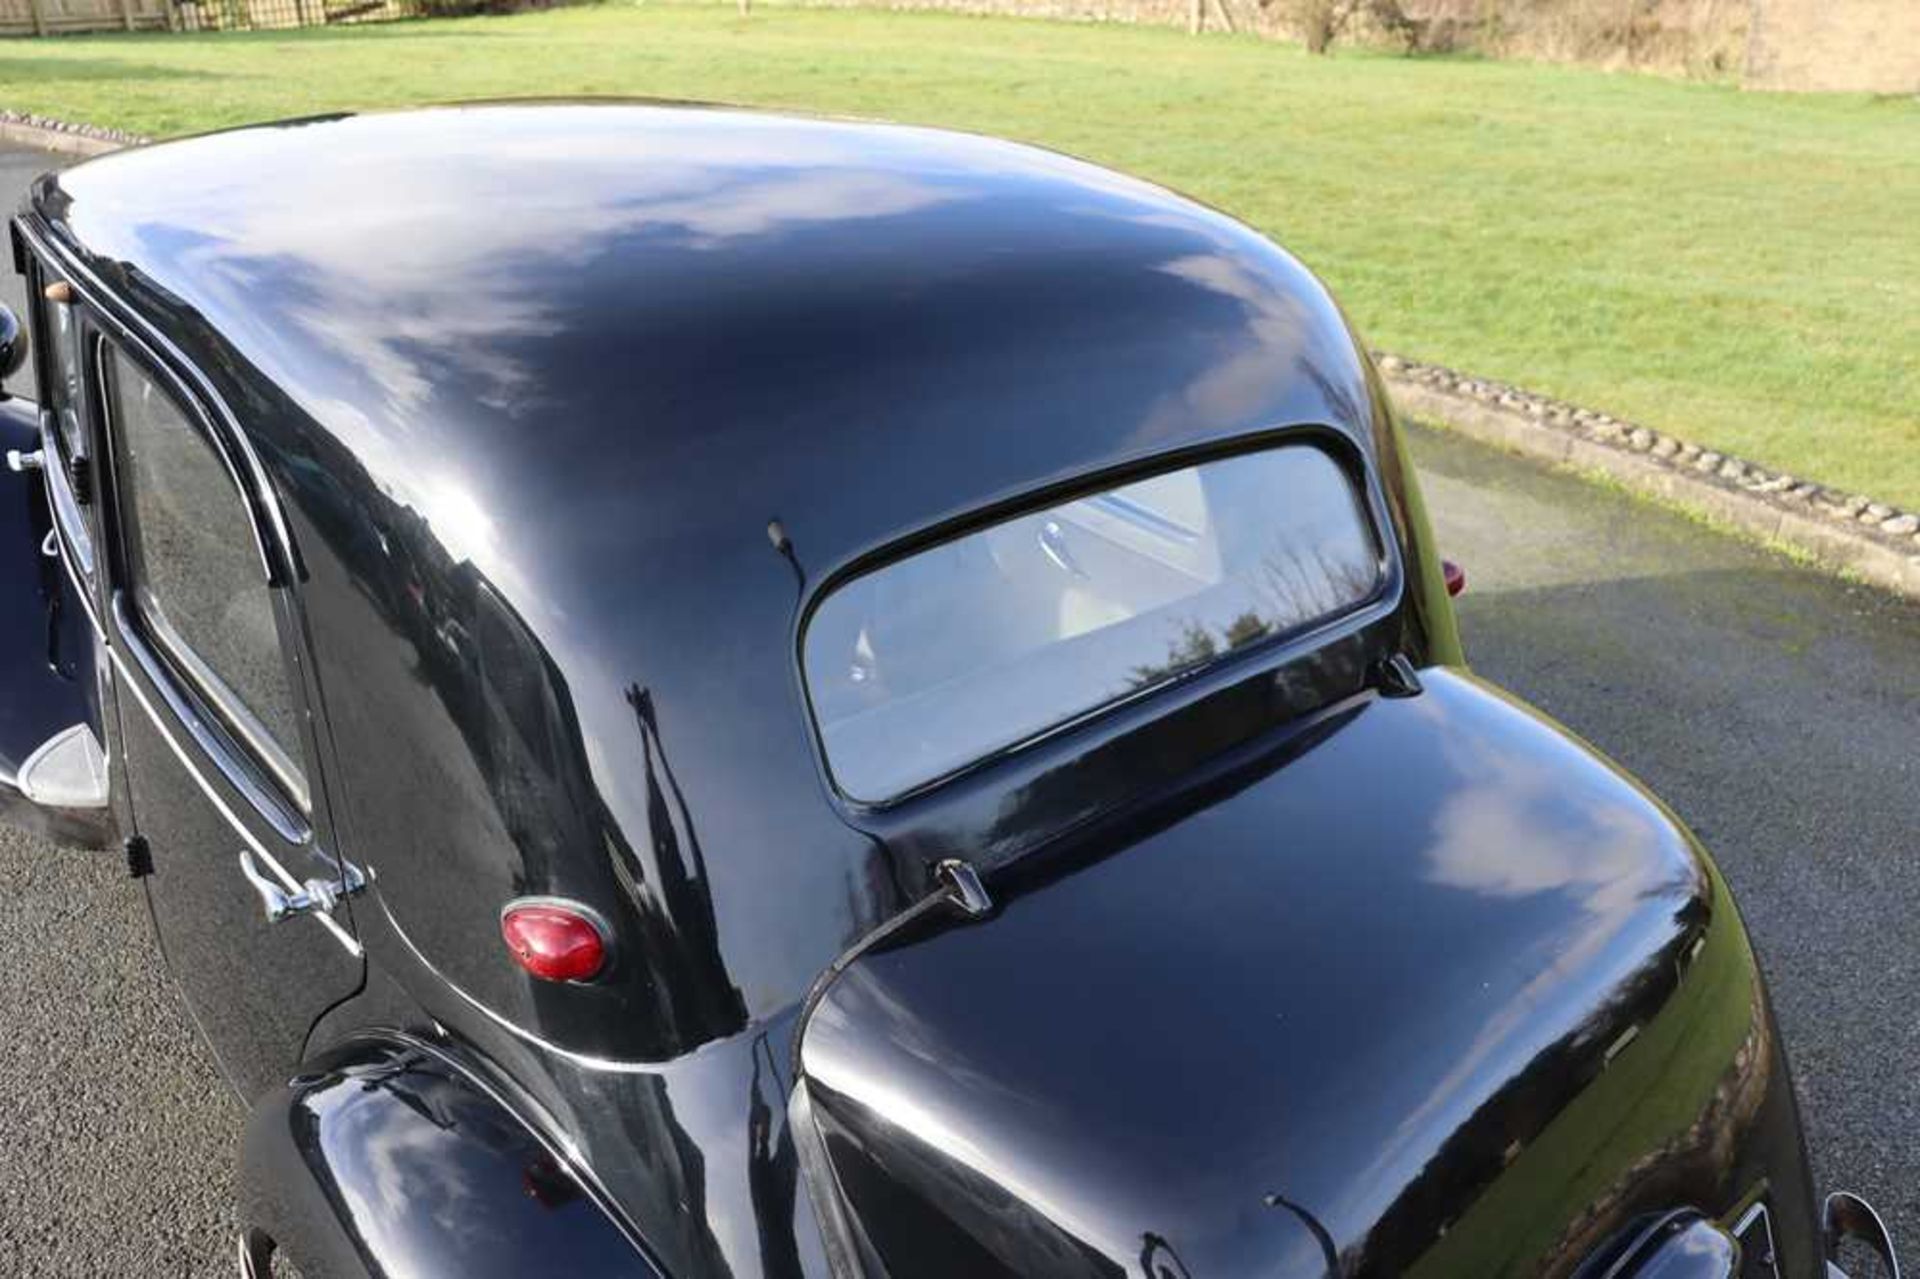 1952 Citroën 11BL Traction Avant In current ownership for over 40 years - Image 32 of 60